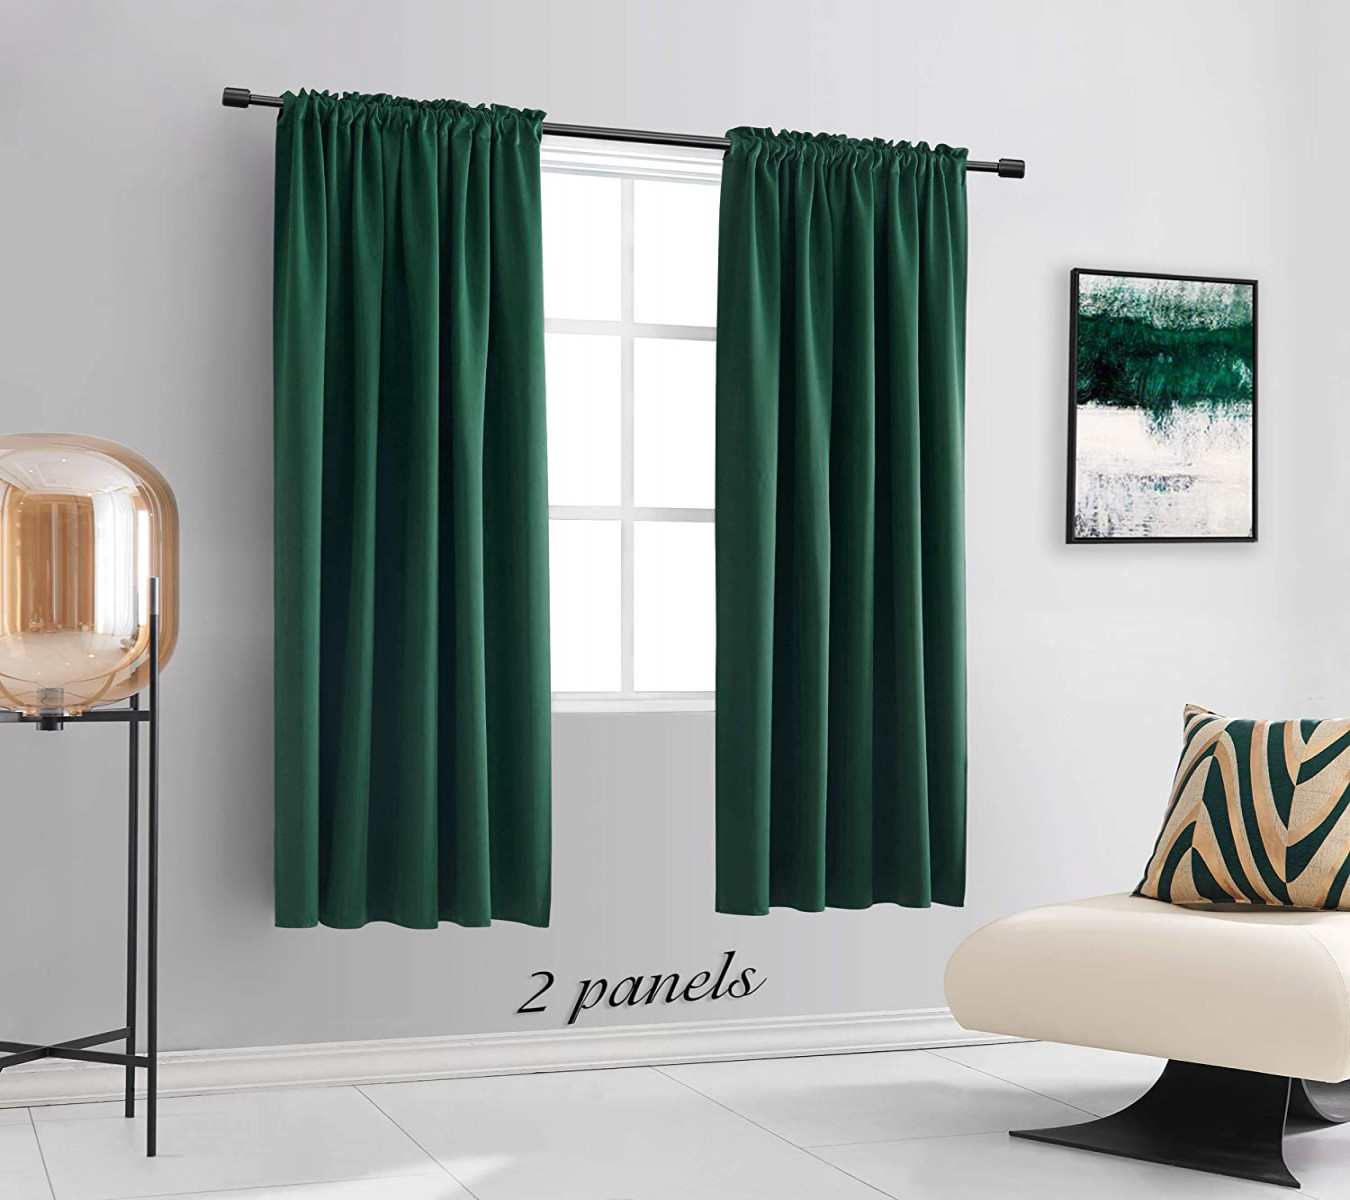 DONREN Blackout Curtains for Bedroom,  cm Long, Dark Green Emerald Green  Thermal Insulated Curtains for Living Room with Rod Pocket,  Panels